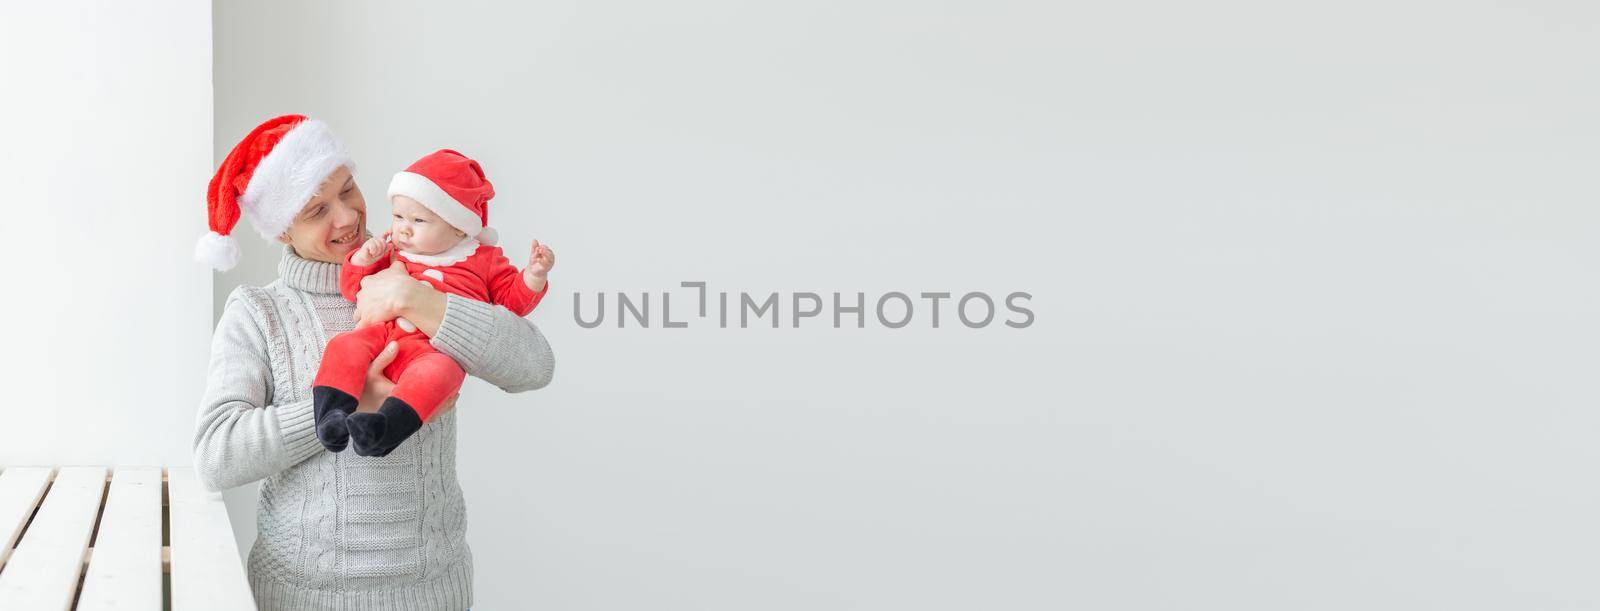 Banner fatherhood and holidays concept - Father with his baby boy wearing Santa hats celebrating Christmas by Satura86